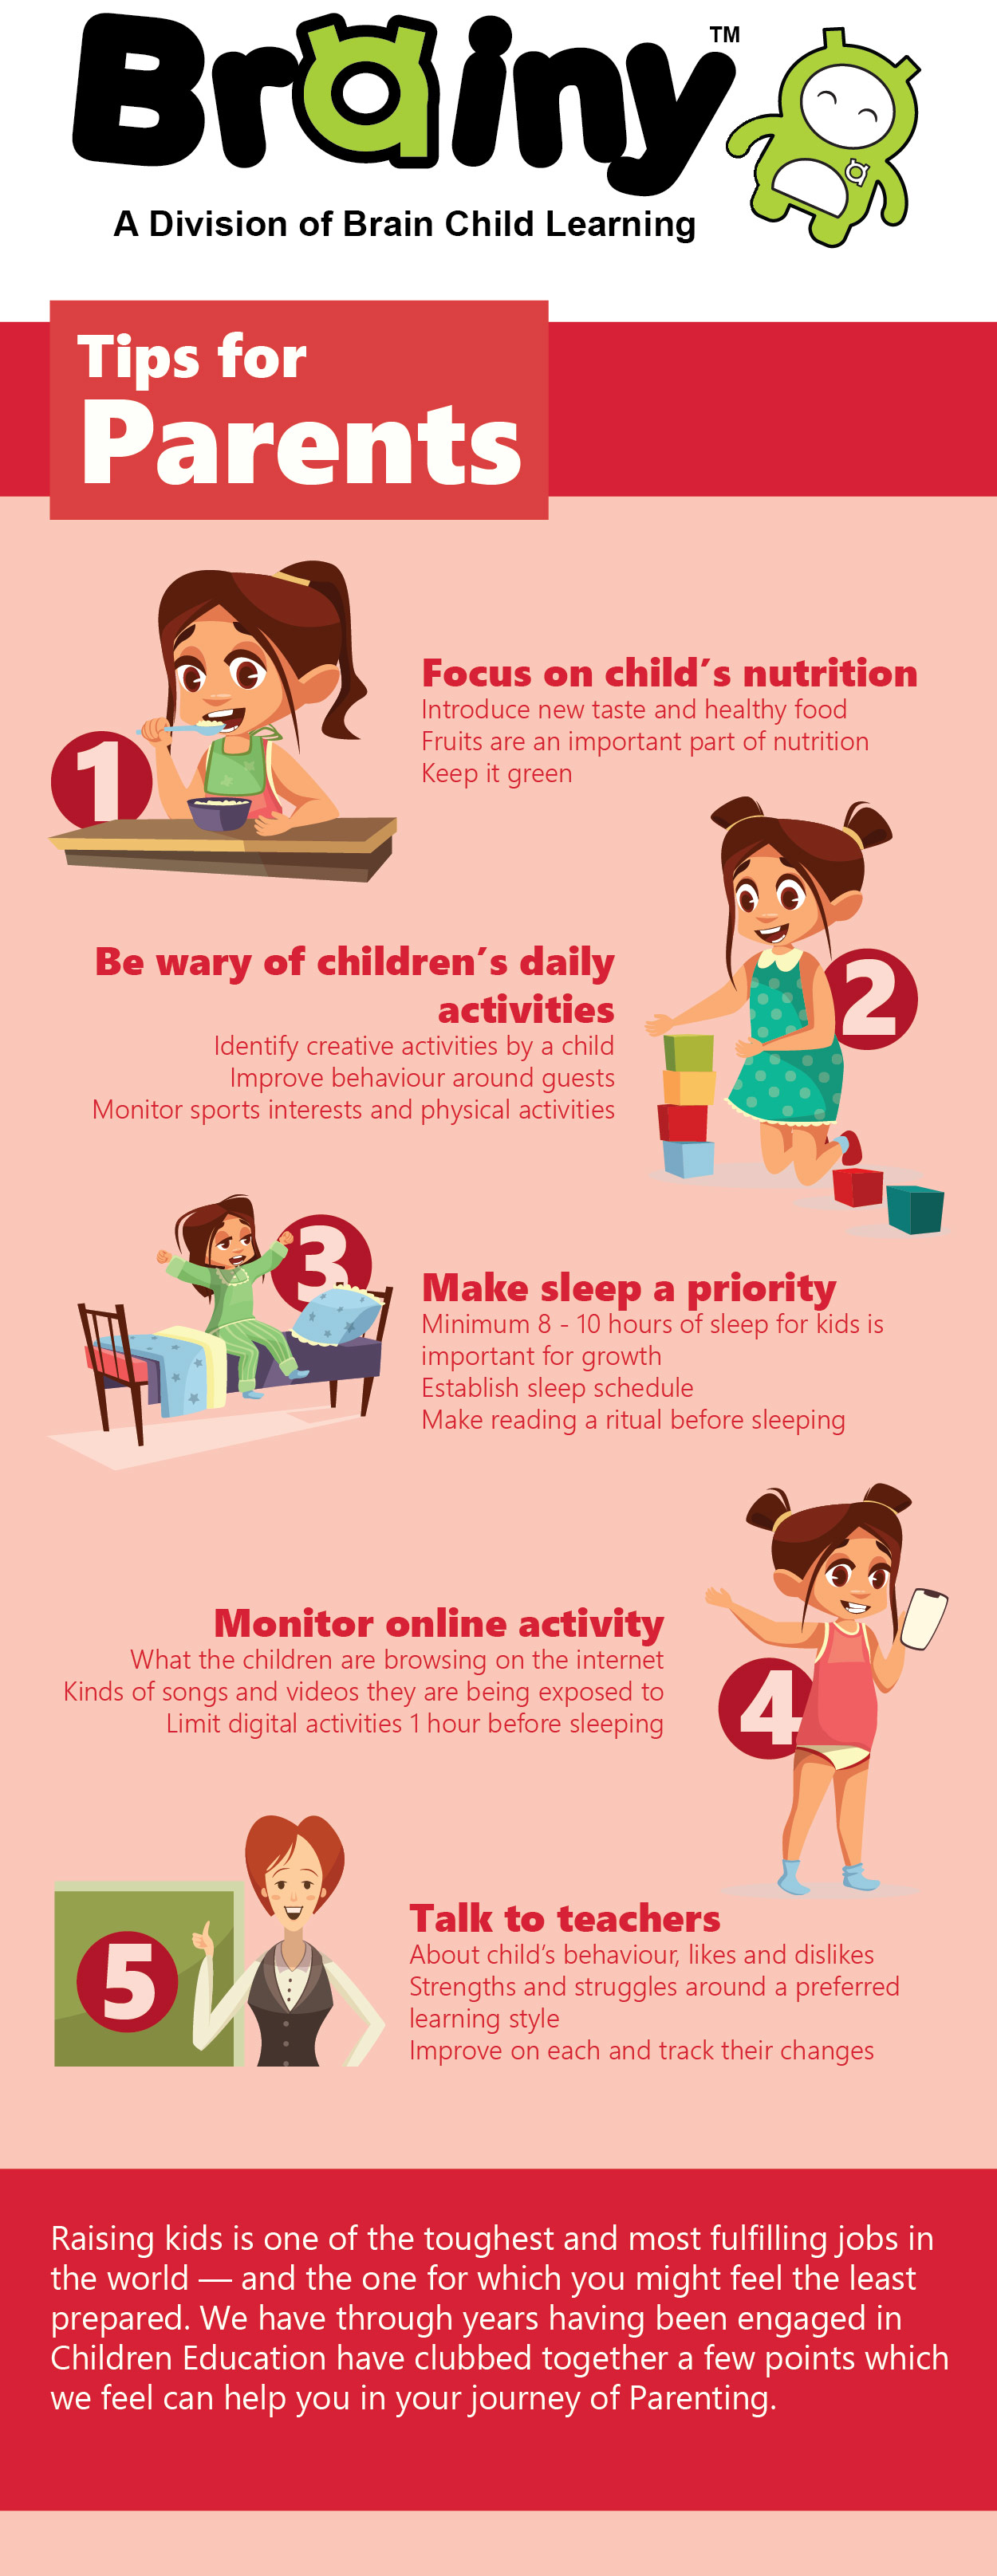 Tips for Parents to perform better at parenting